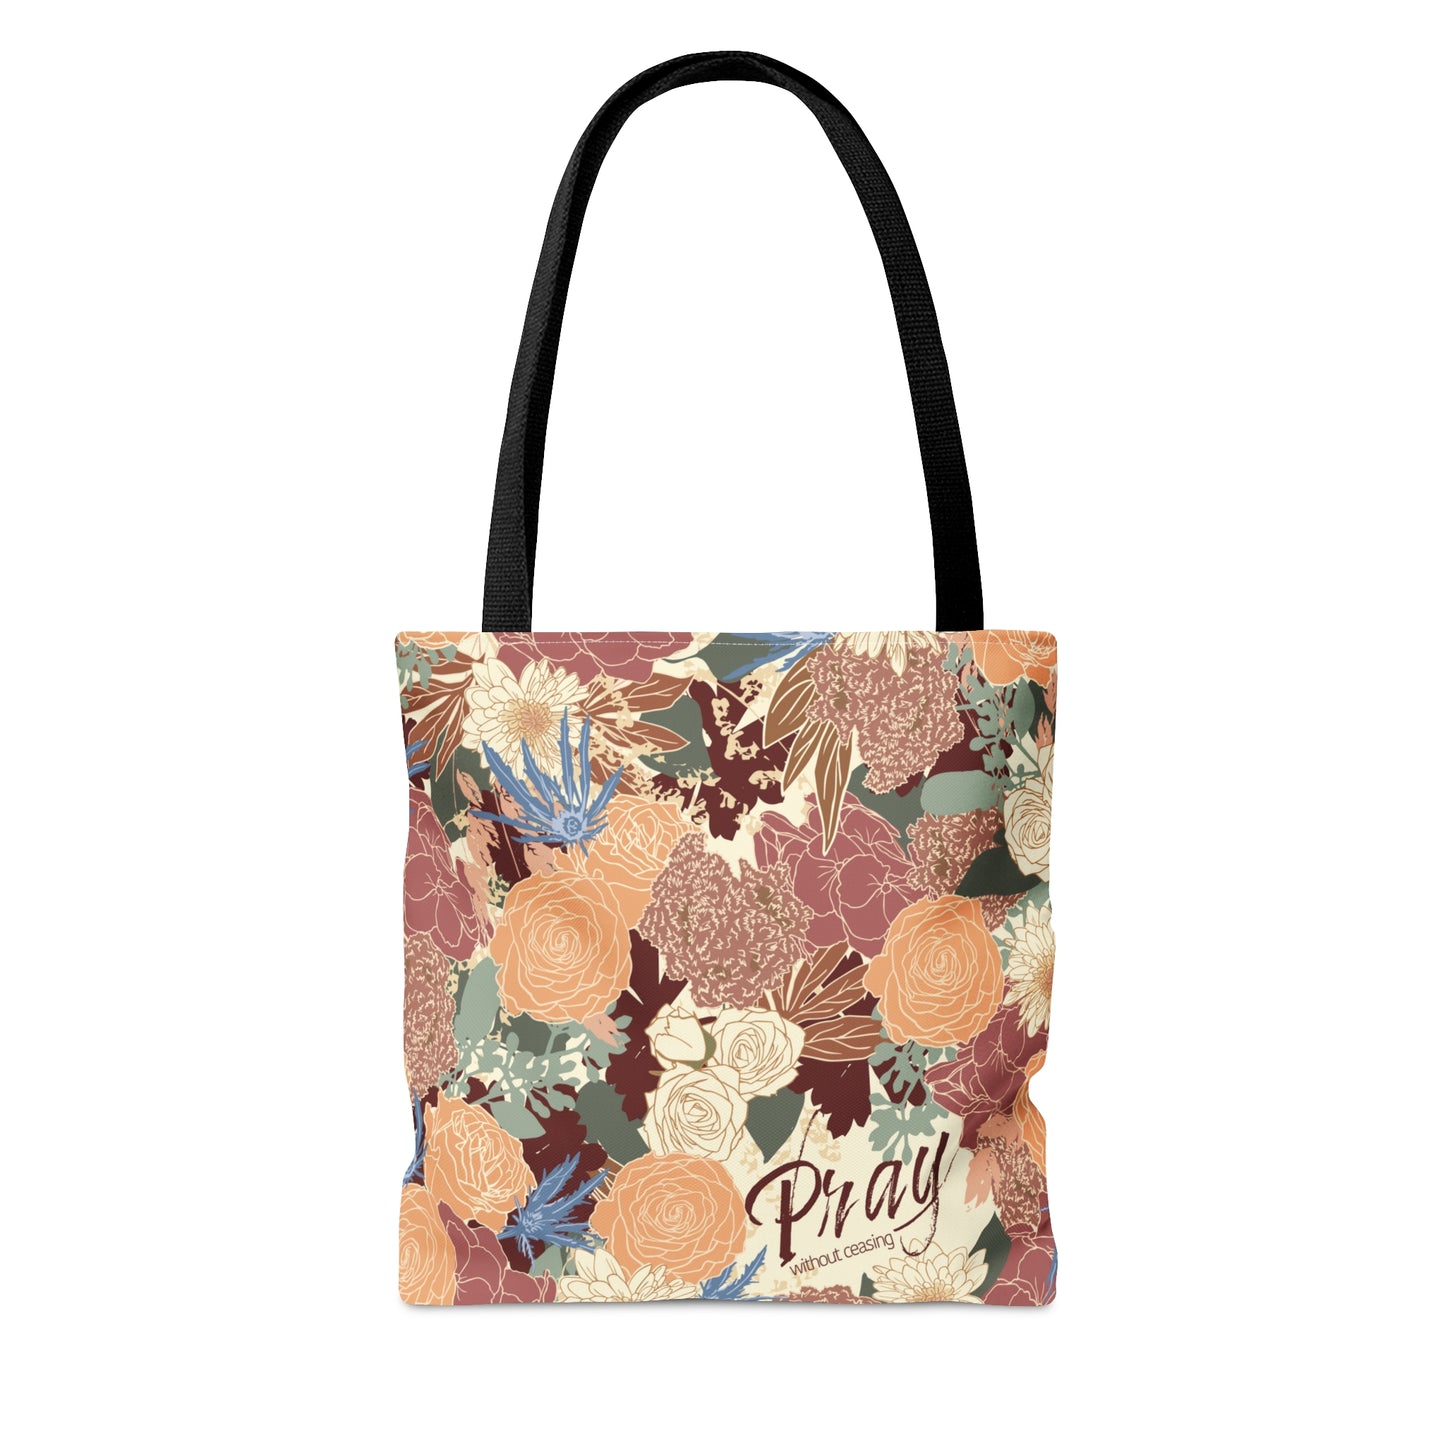 Pray Without Ceasing Floral Tote Bag